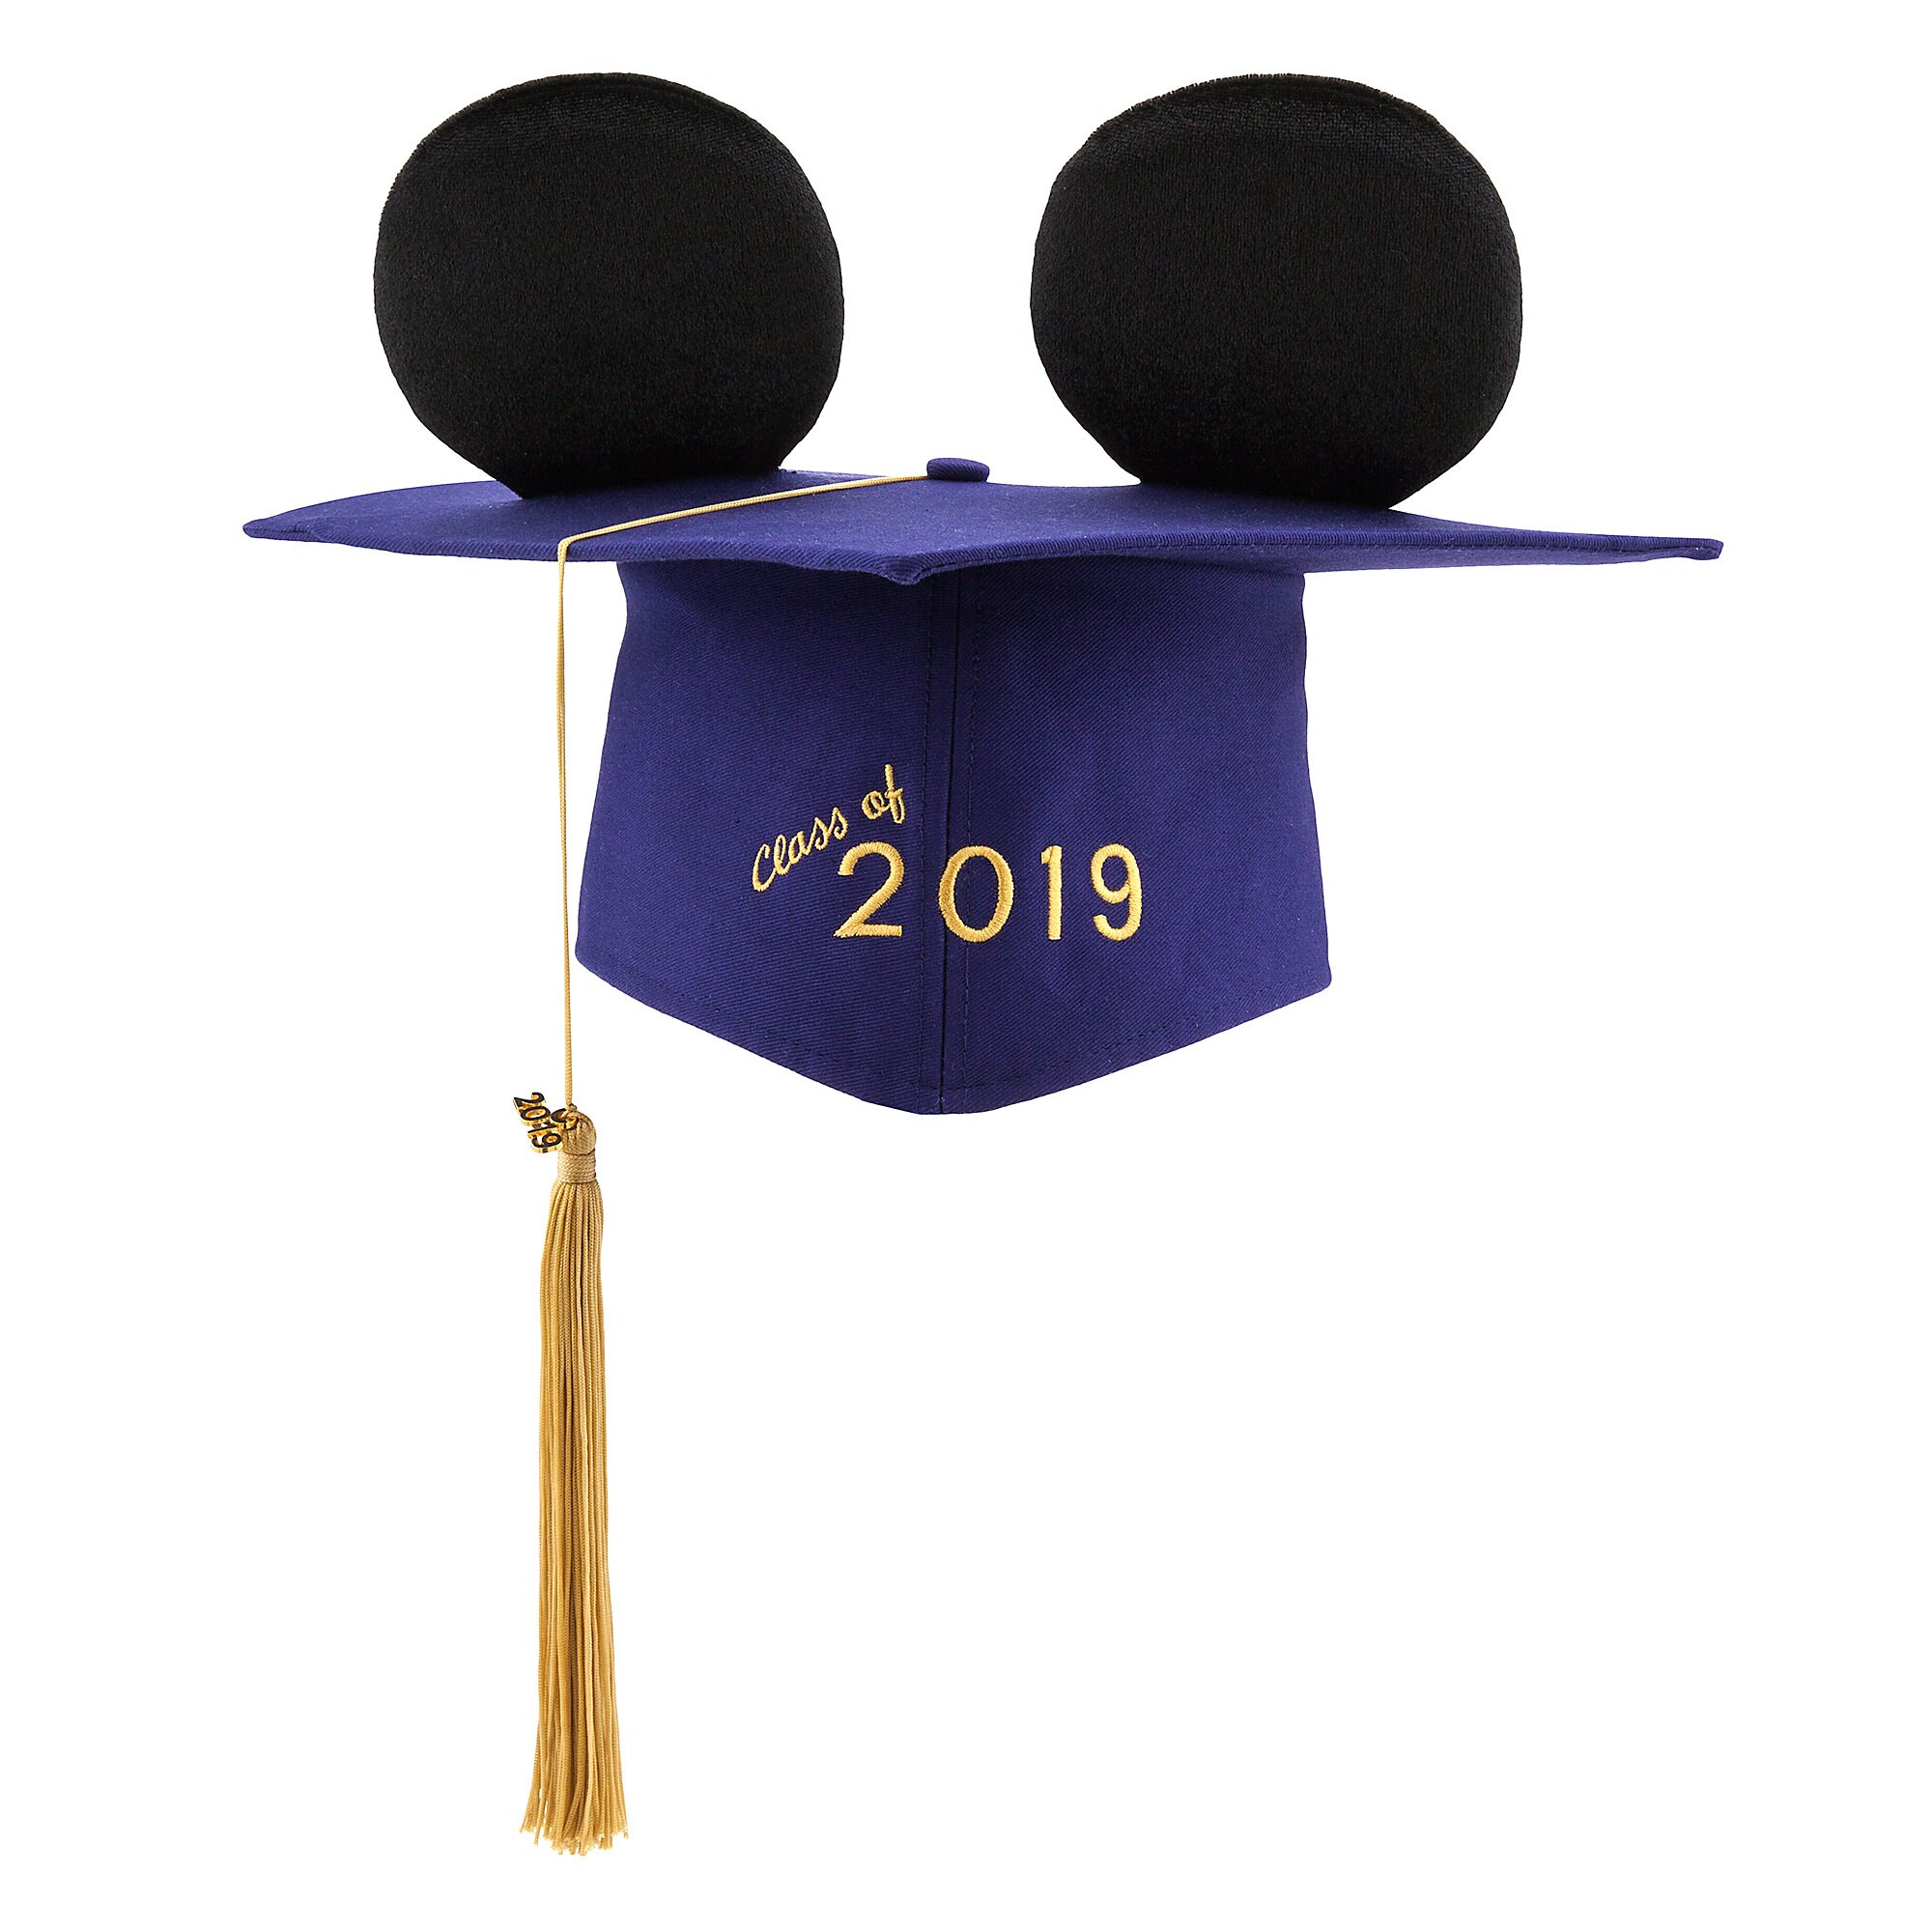 Mickey Mouse Ear Hat Graduation Cap for Adults - 2019